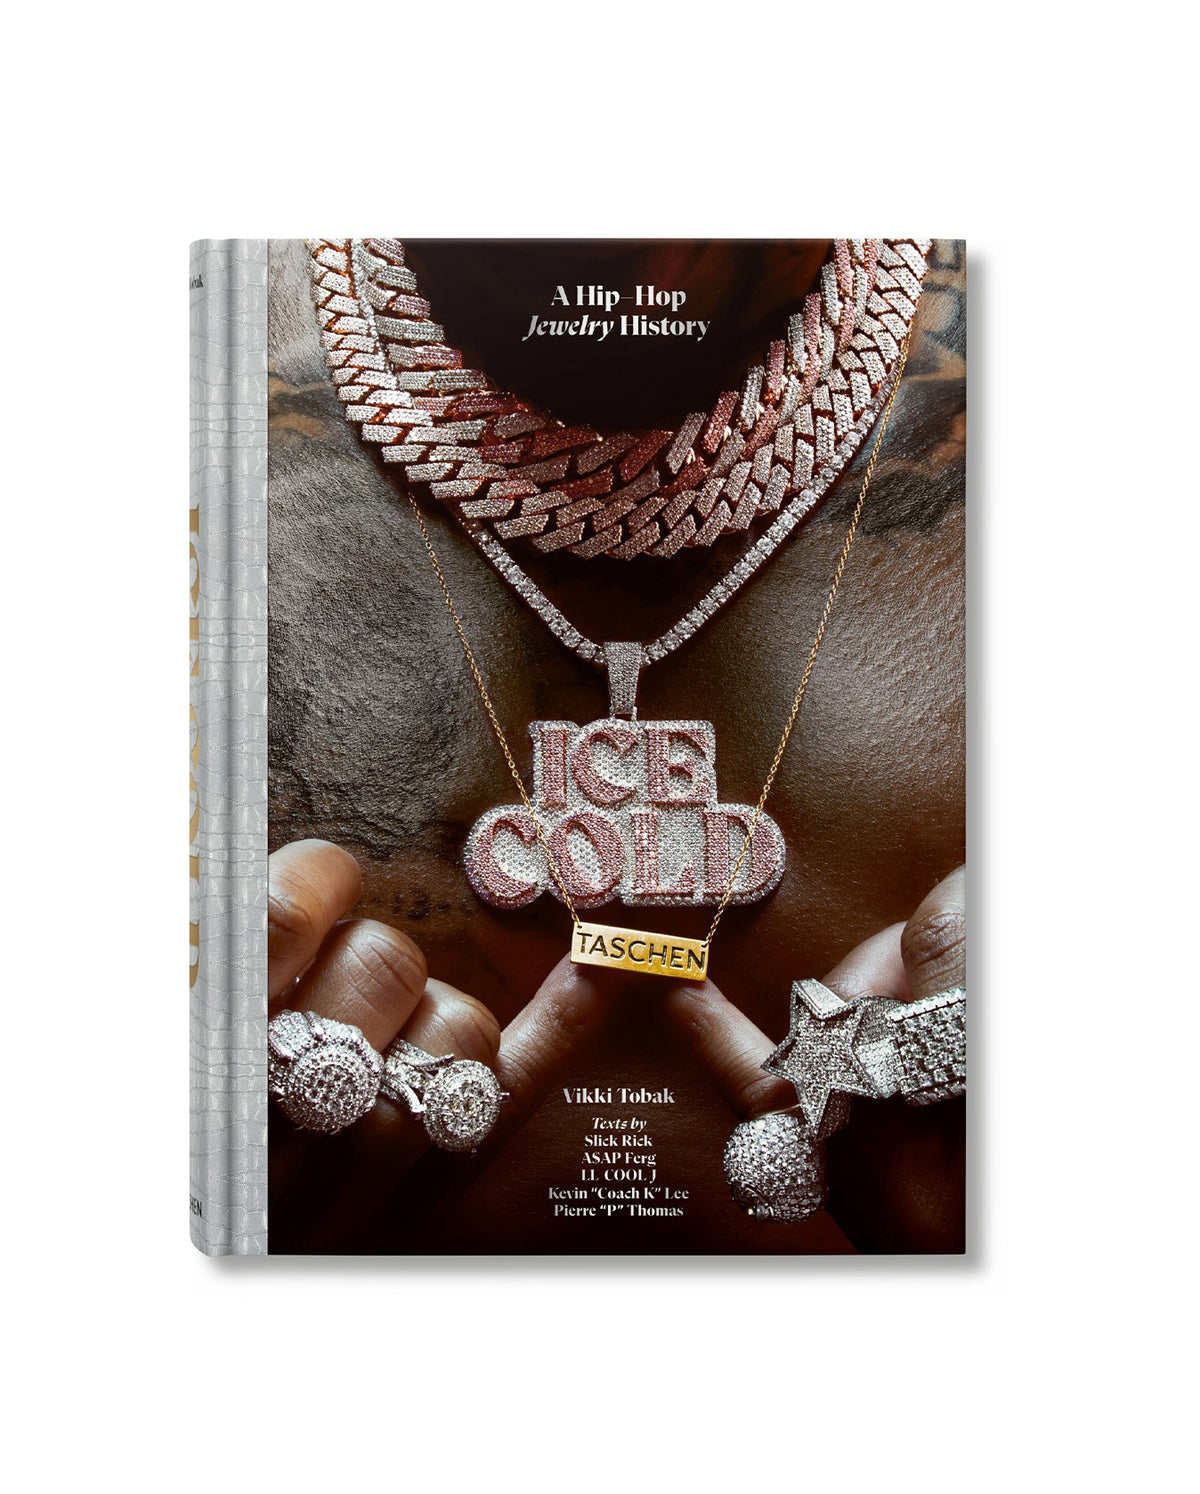 Ice Cold. The History Of Hip-Hop Jewelry